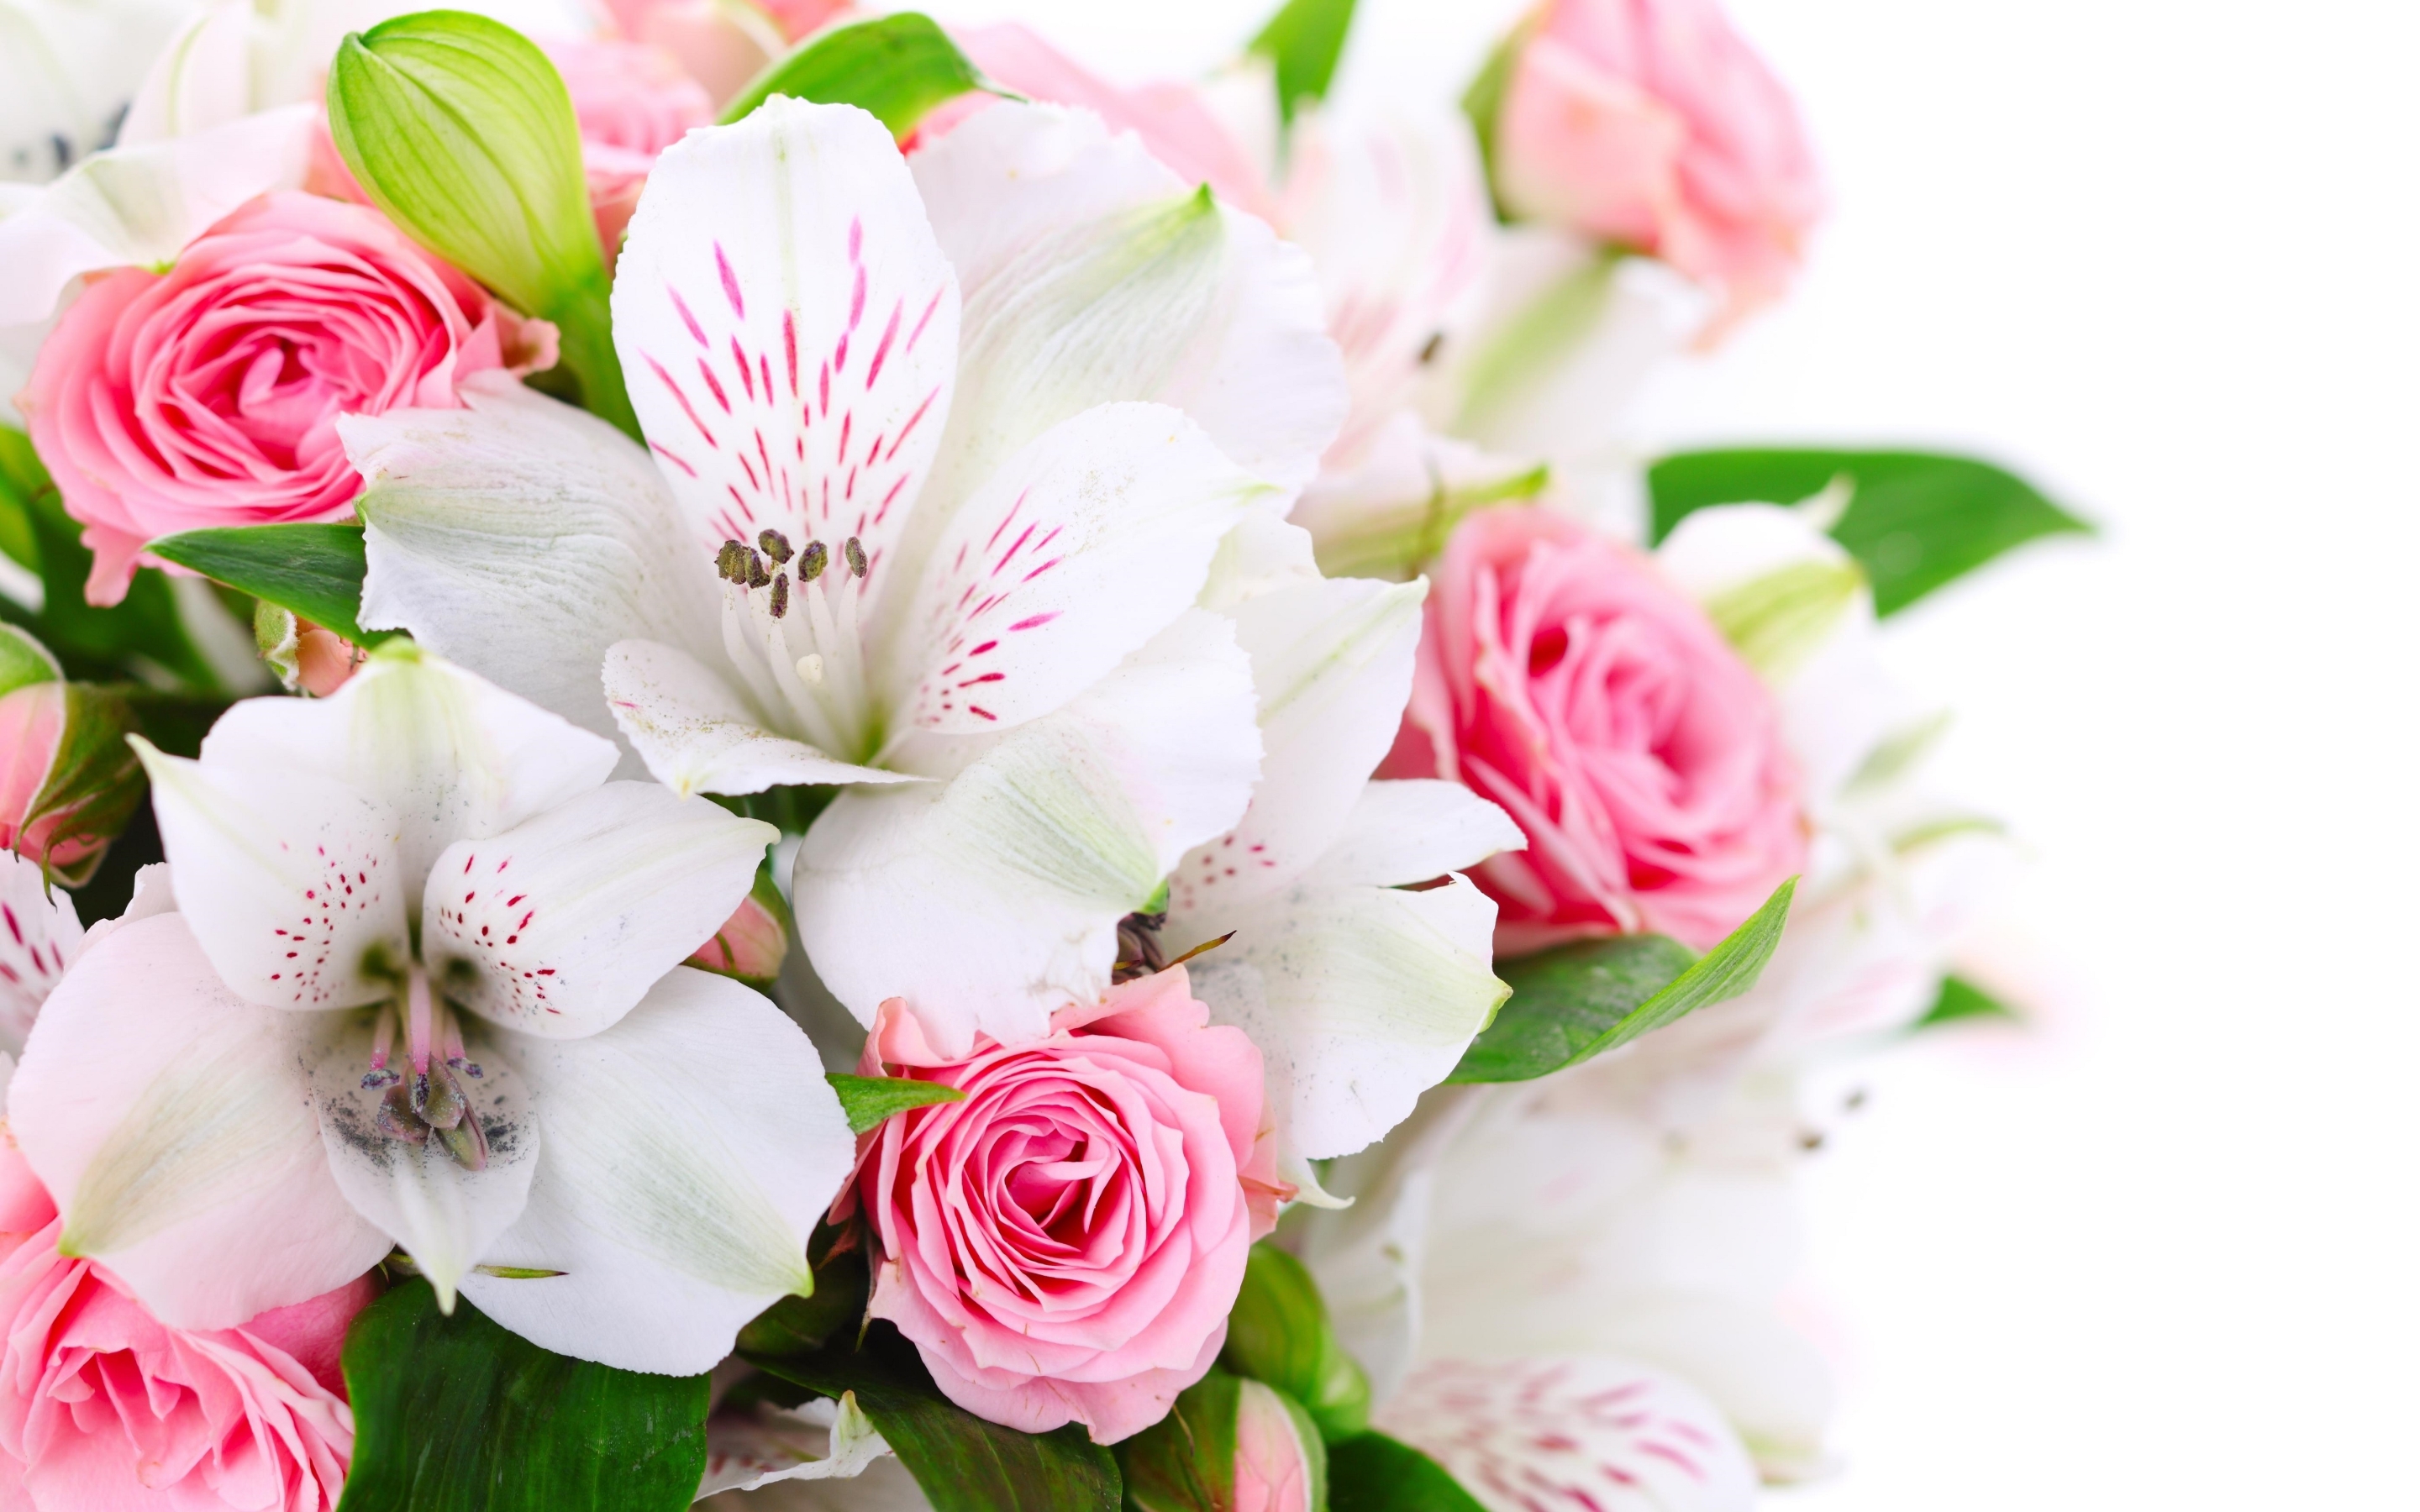 Pink Roses and White Lilies  for 2880 x 1800 Retina Display resolution